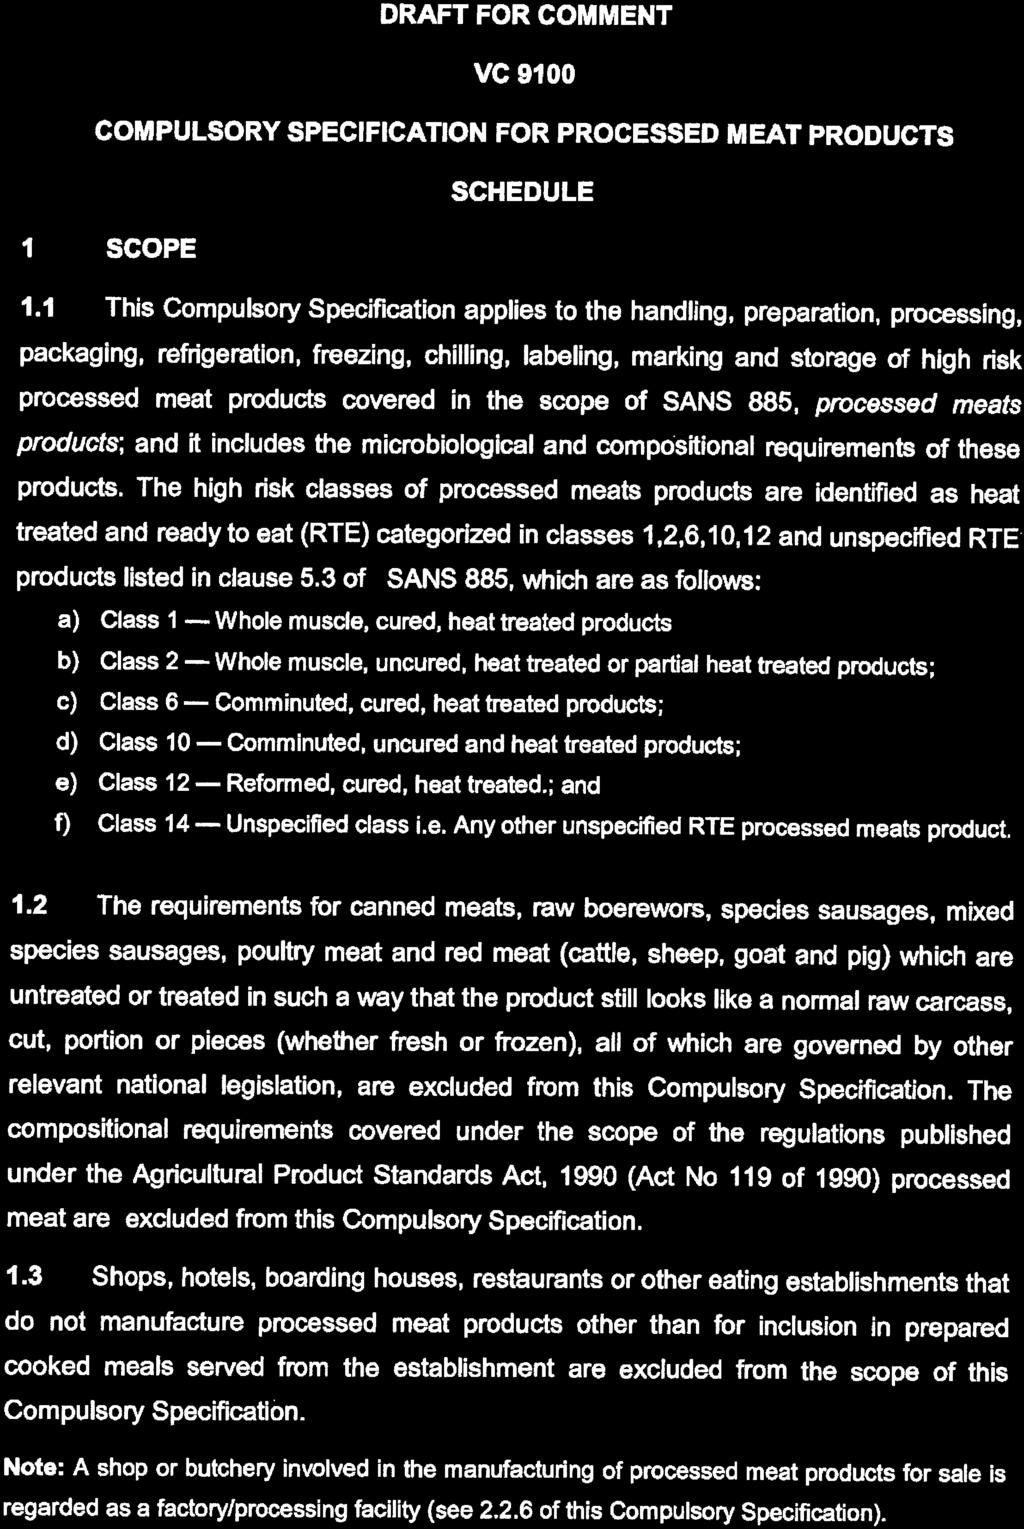 STAATSKOERANT, 20 JULIE 2018 No. 41781 49 DRAFT FOR COMMENT VC 9100 COMPULSORY SPECIFICATION FOR PROCESSED MEAT PRODUCTS SCHEDULE 1 SCOPE 1.